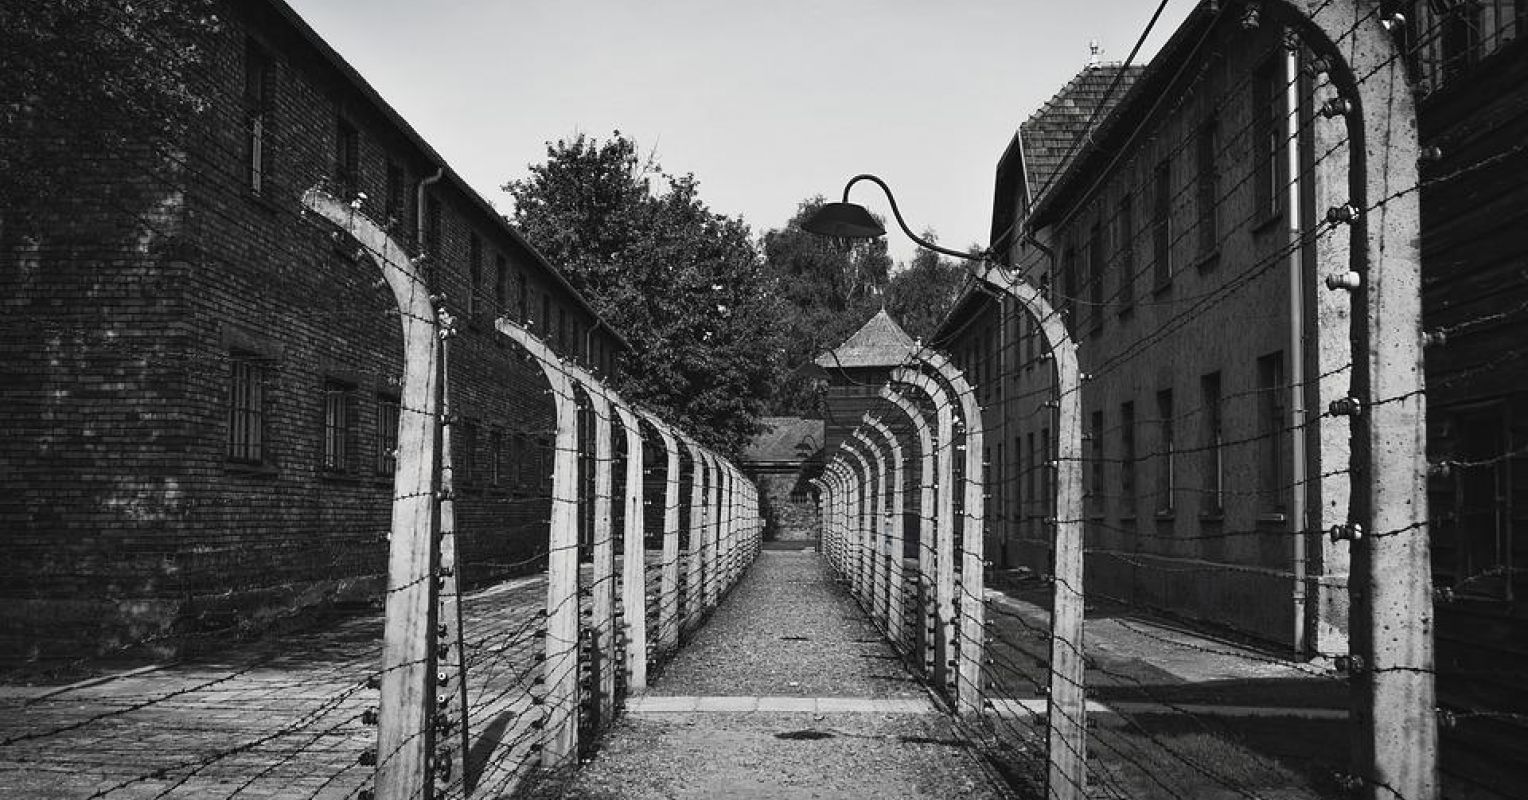 Sex In Nazi Death Camps - The Mystery of Lost Periods During the Holocaust | Psychology Today